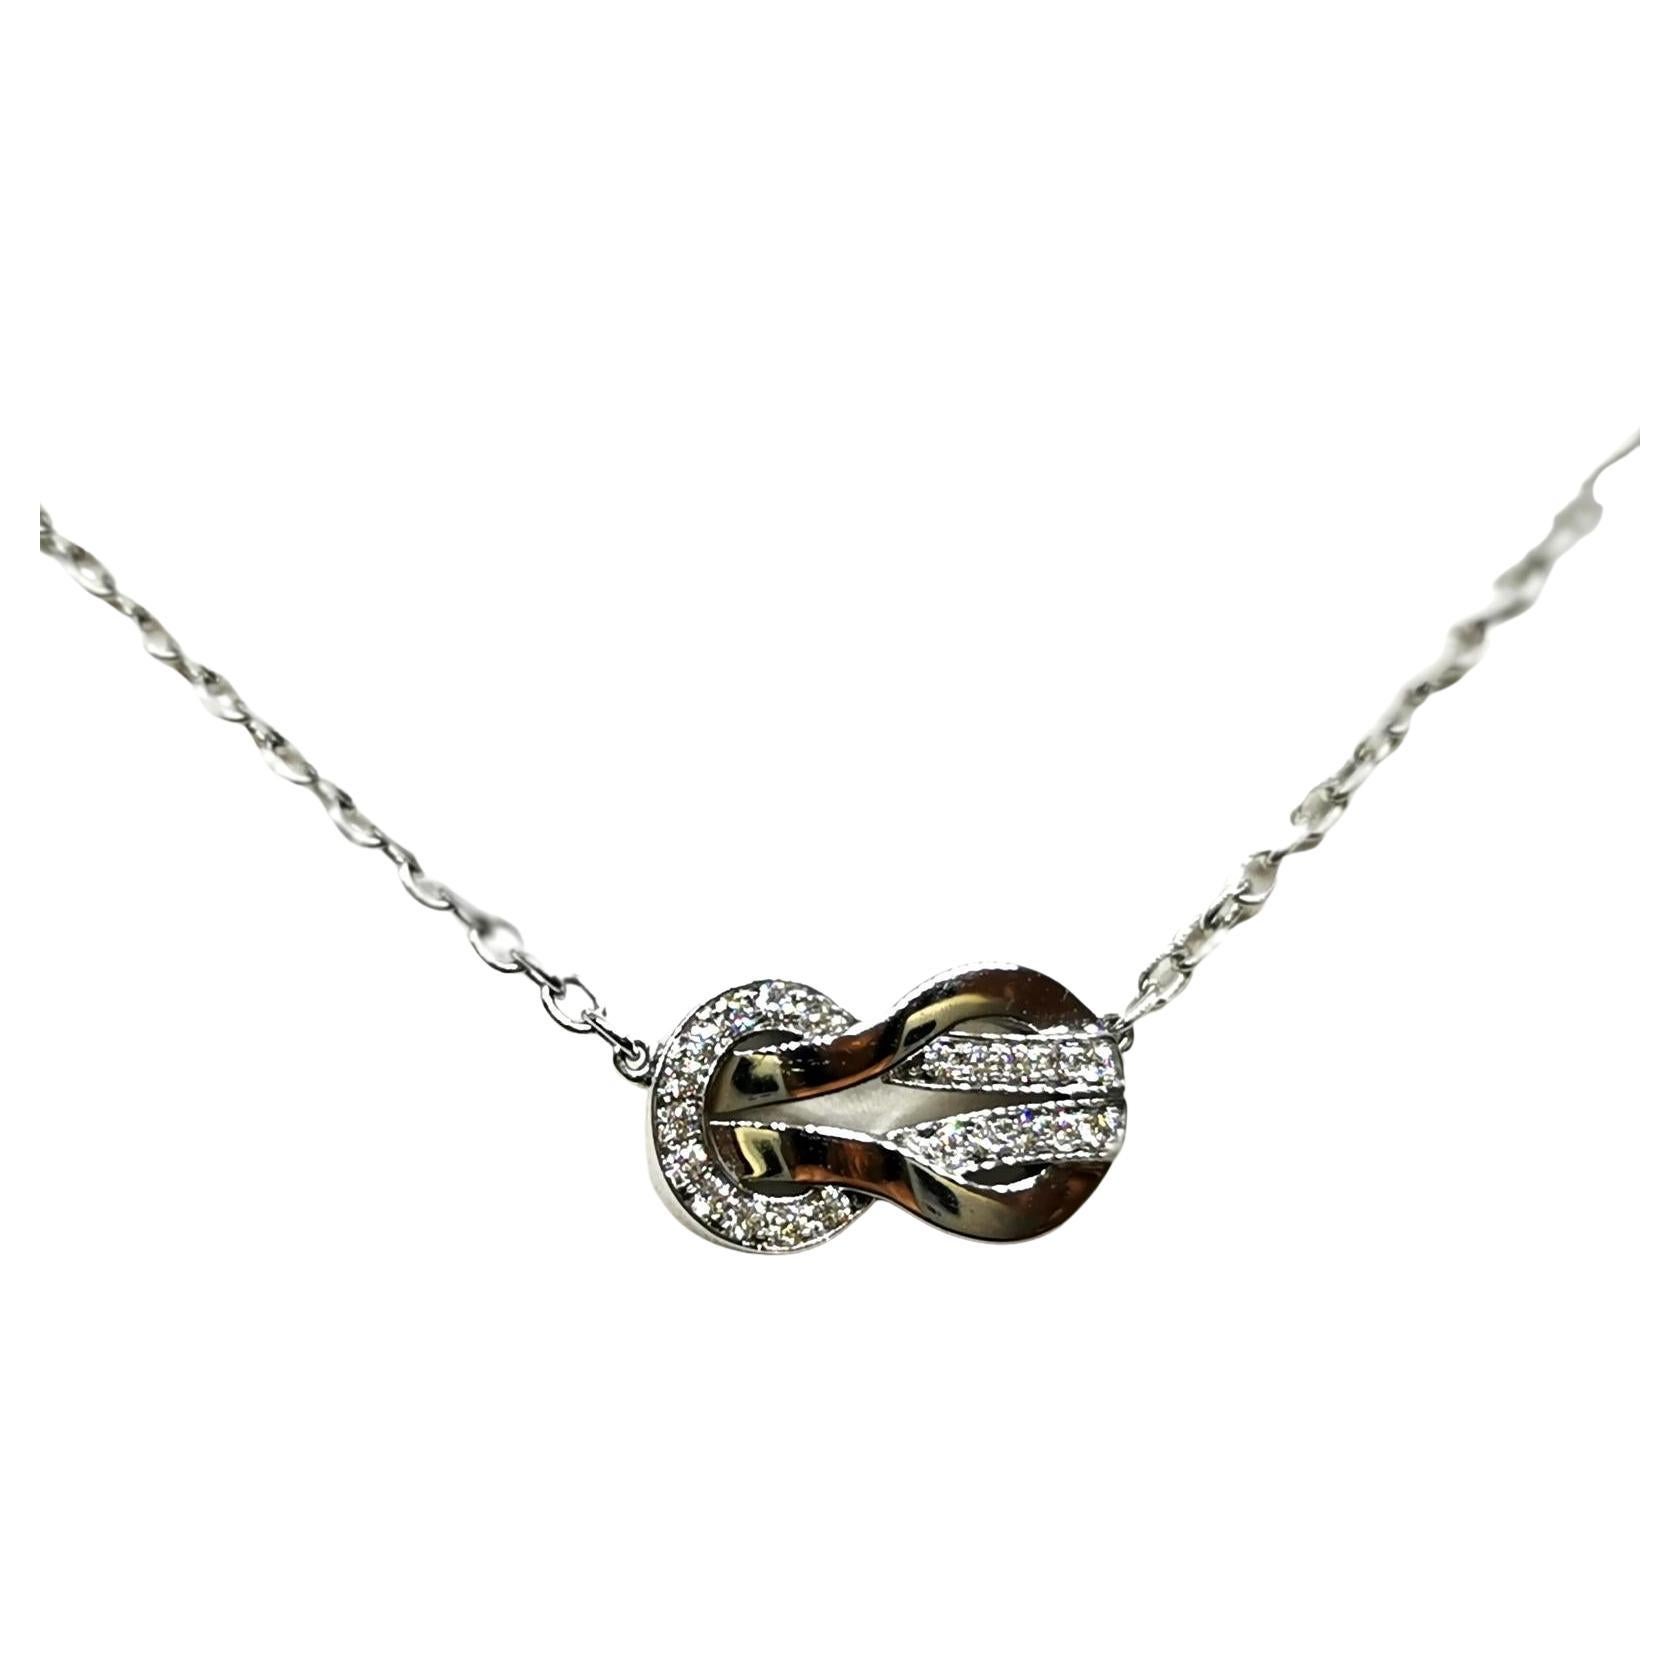 Necklace Signed by Fred, White Gold 750 Thousandths '18 Carats' For Sale